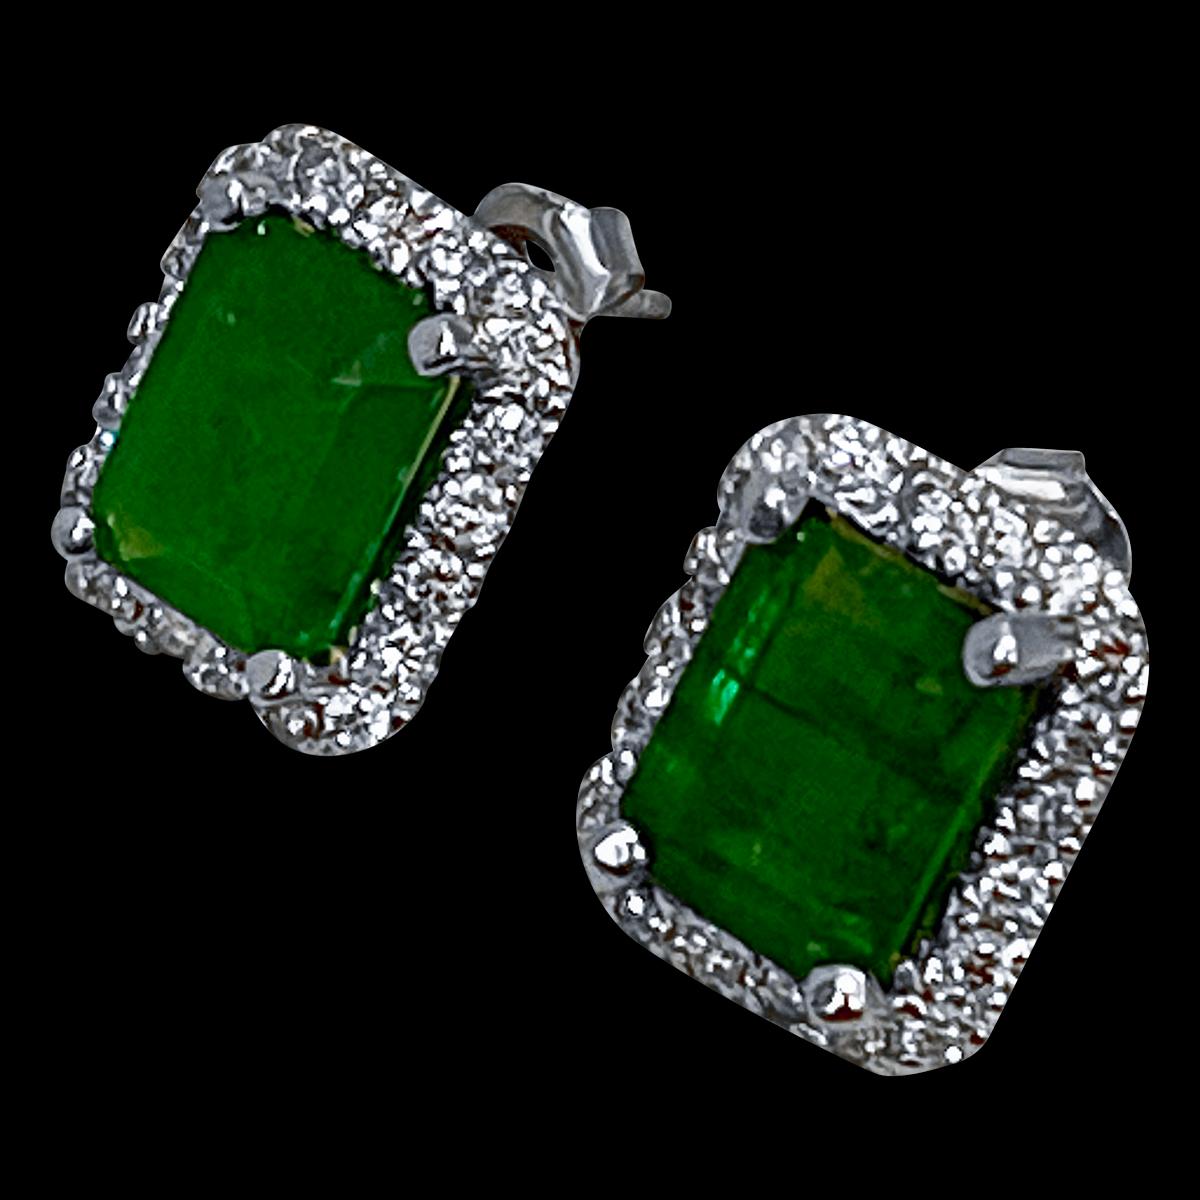 6.5 Carat Emerald Cut Emerald & 1.25 Ct Diamond Stud Earrings 14 Kt White Gold In Excellent Condition In New York, NY